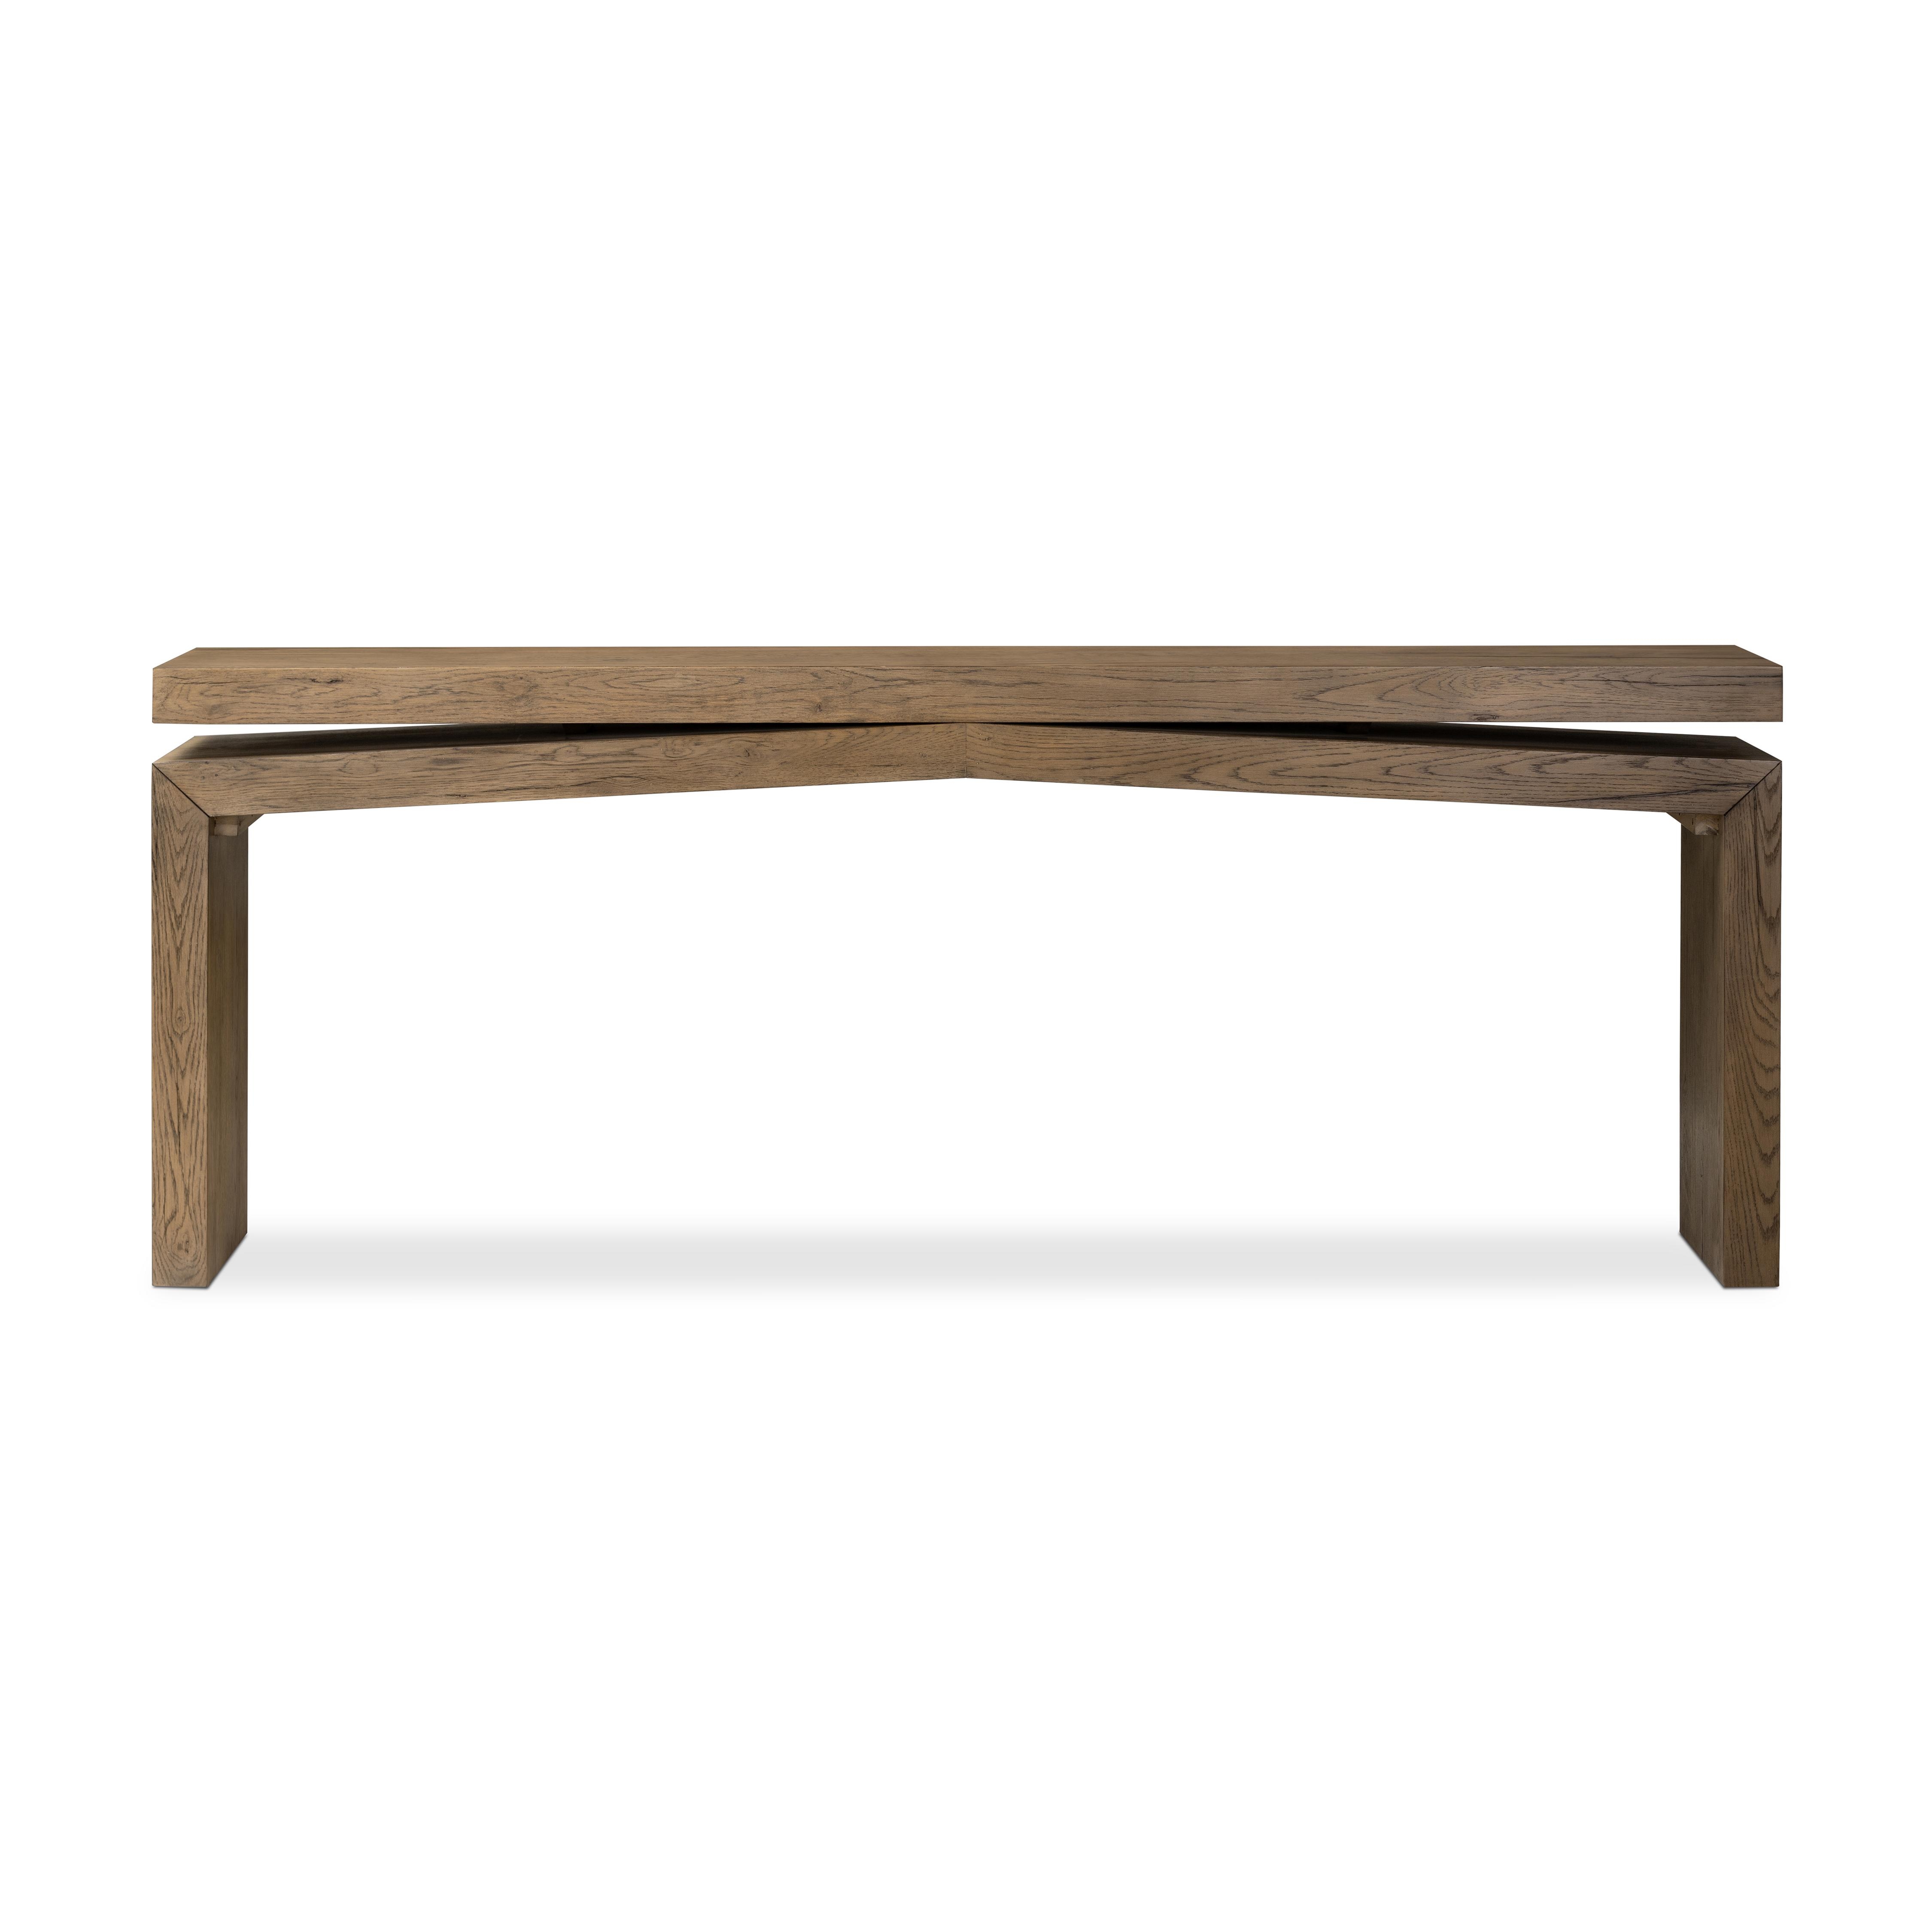 Matthes Console Table-Rustic Natural - Image 2